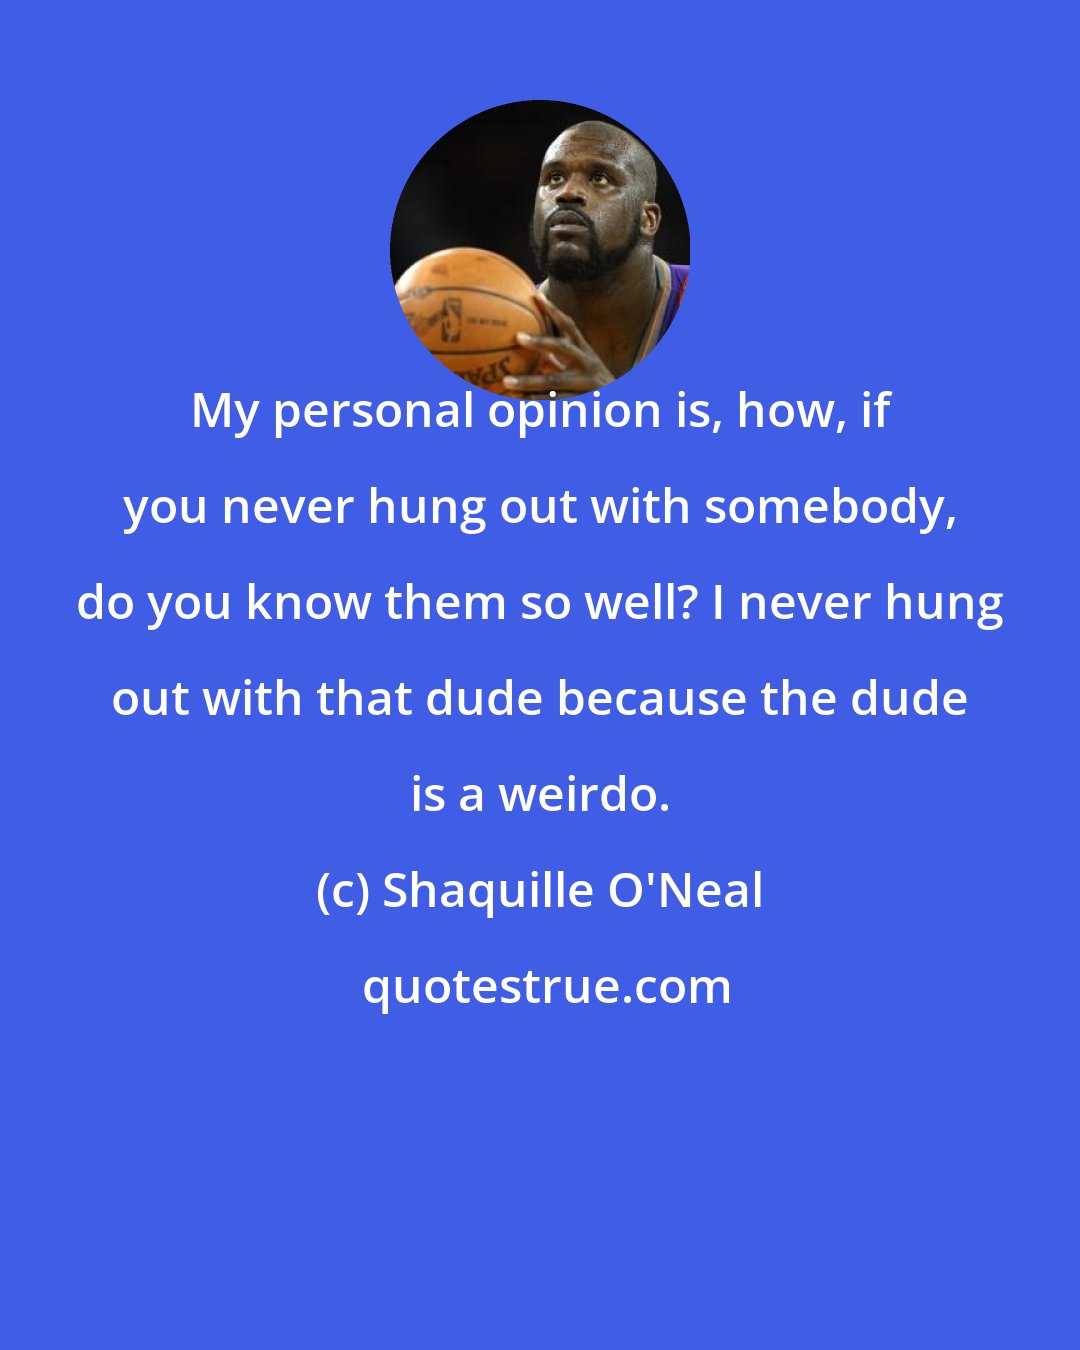 Shaquille O'Neal: My personal opinion is, how, if you never hung out with somebody, do you know them so well? I never hung out with that dude because the dude is a weirdo.